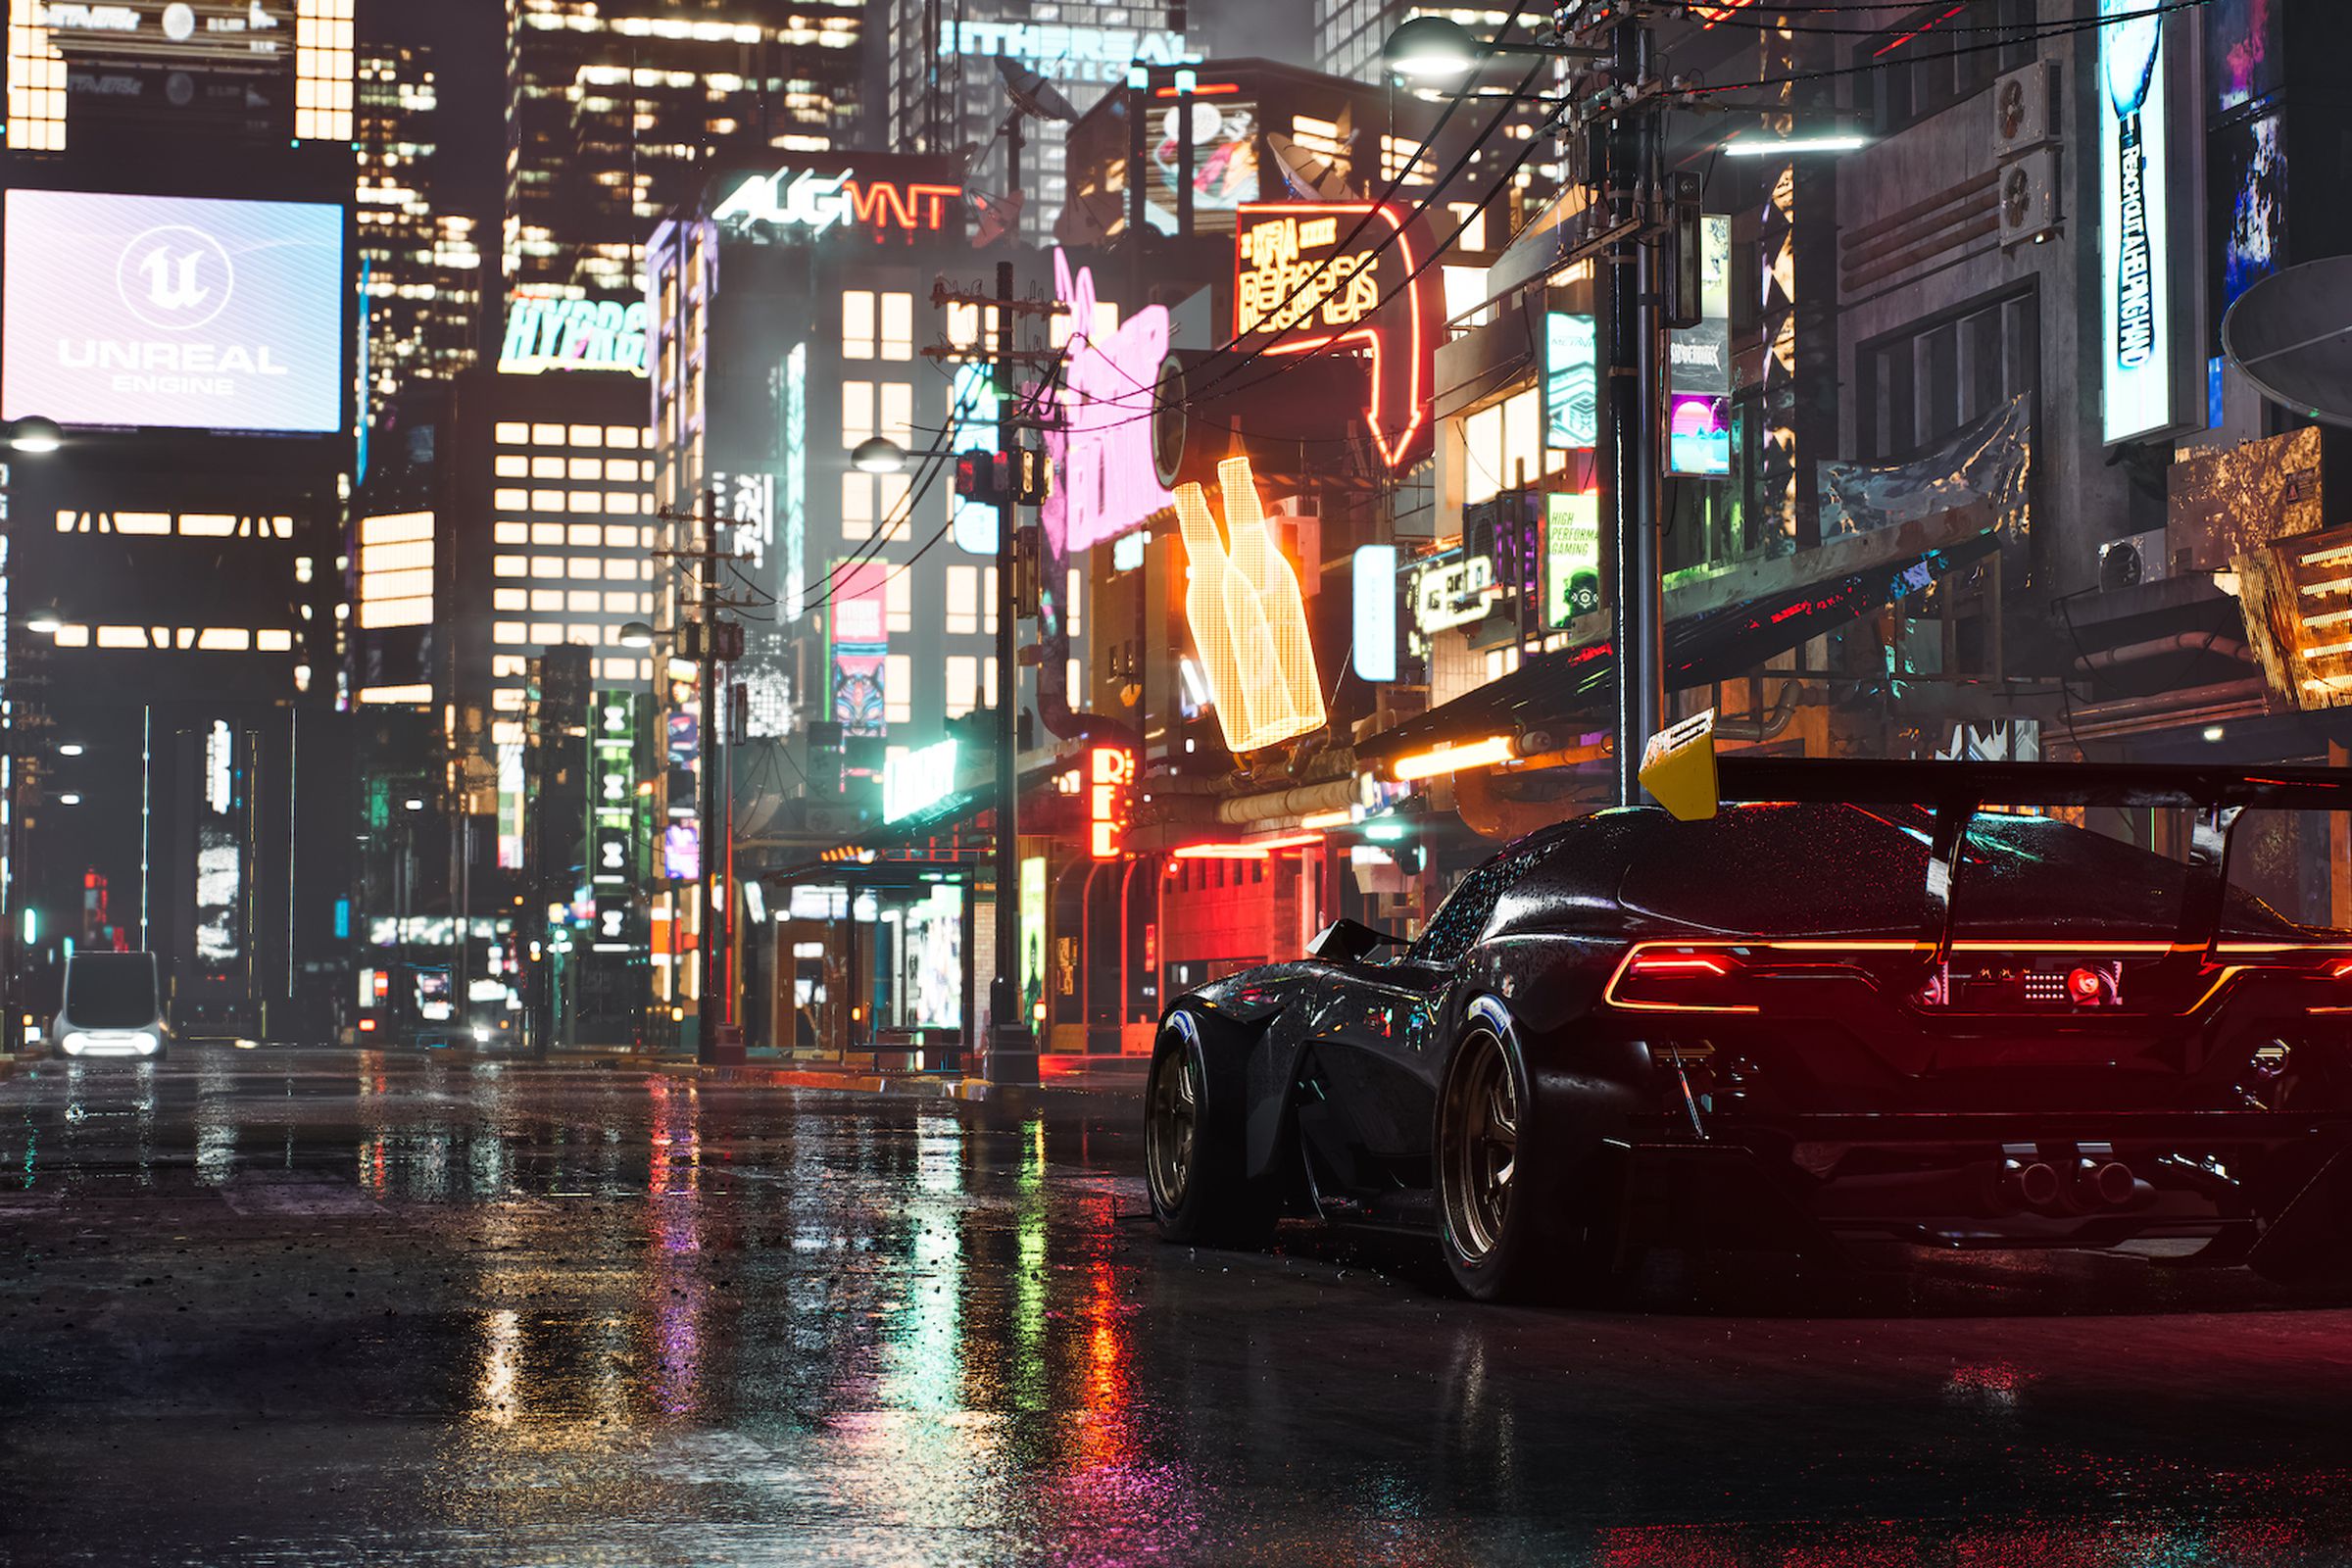 A promotional Unreal Engine screenshot showing a car in a brightly lit city.